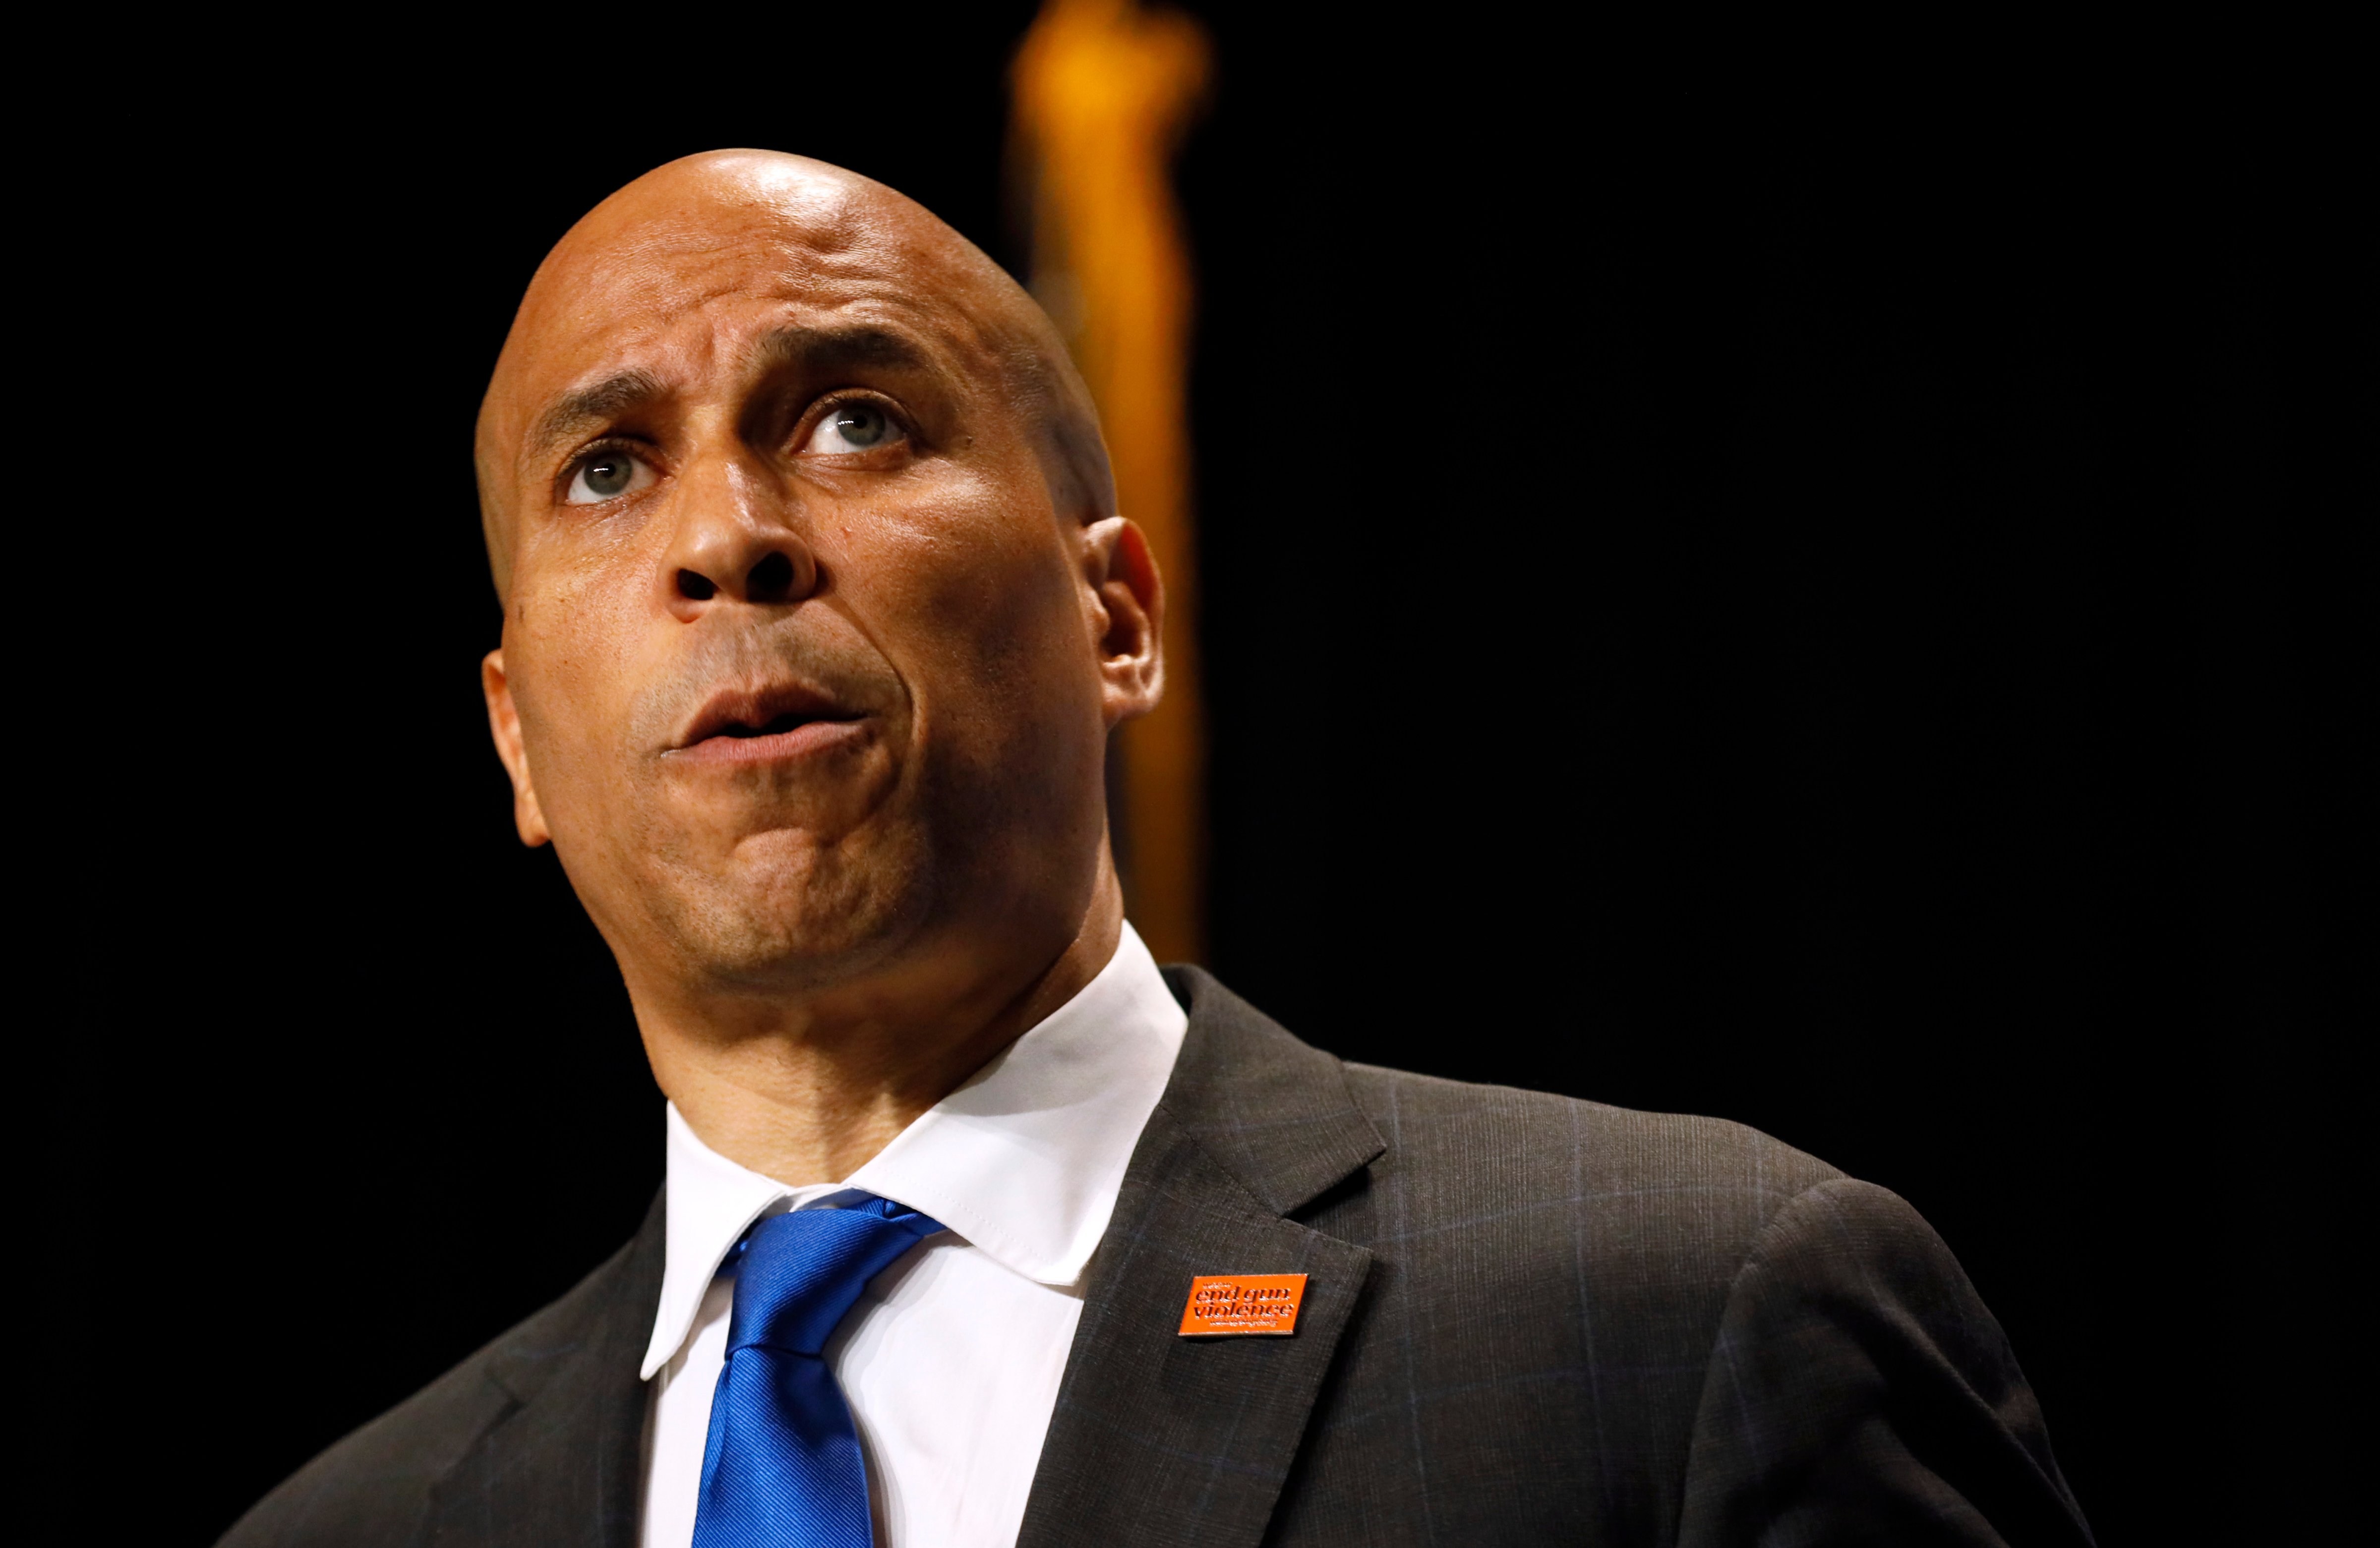 Democratic presidential candidate Cory Booker speaks during the Iowa Democratic Party's Hall of Fame Celebration, Sunday, June 9, 2019, in Cedar Rapids, Iowa. (Charlie Neibergall—AP)